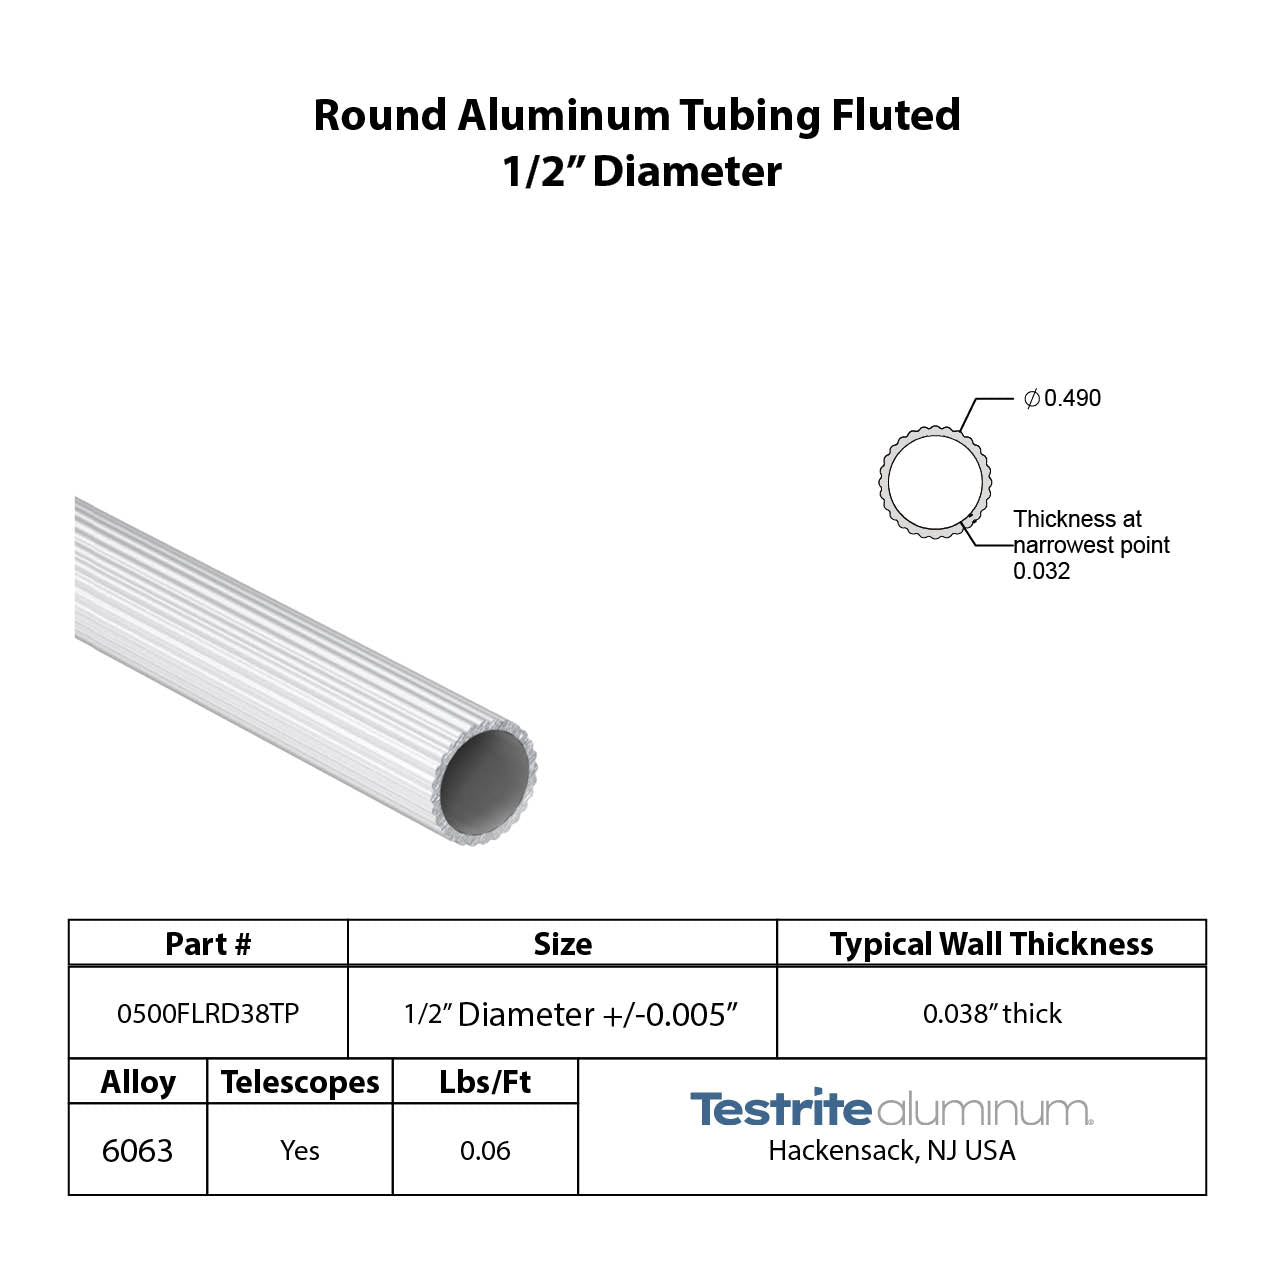 1/2" Round aluminum tube fluted, fluted 0.5" aluminum tube with ribs ridges .038" wall similar to .035" wall. Standard tolerances apply